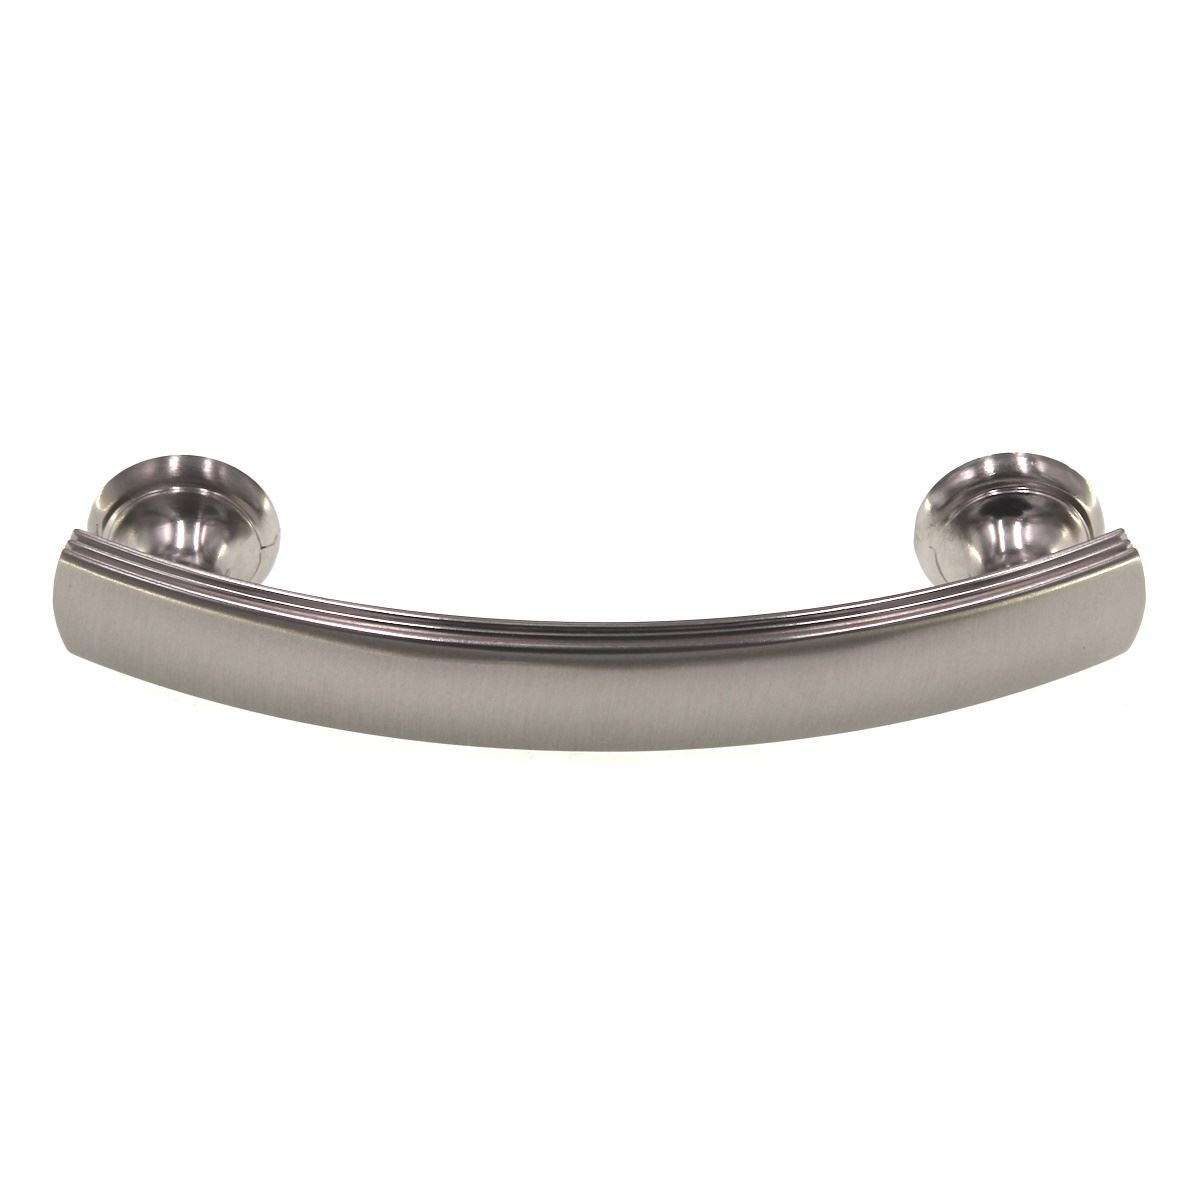 Hickory Hardware American Diner 3" Ctr Cabinet Pull Stainless Steel P2143-SS